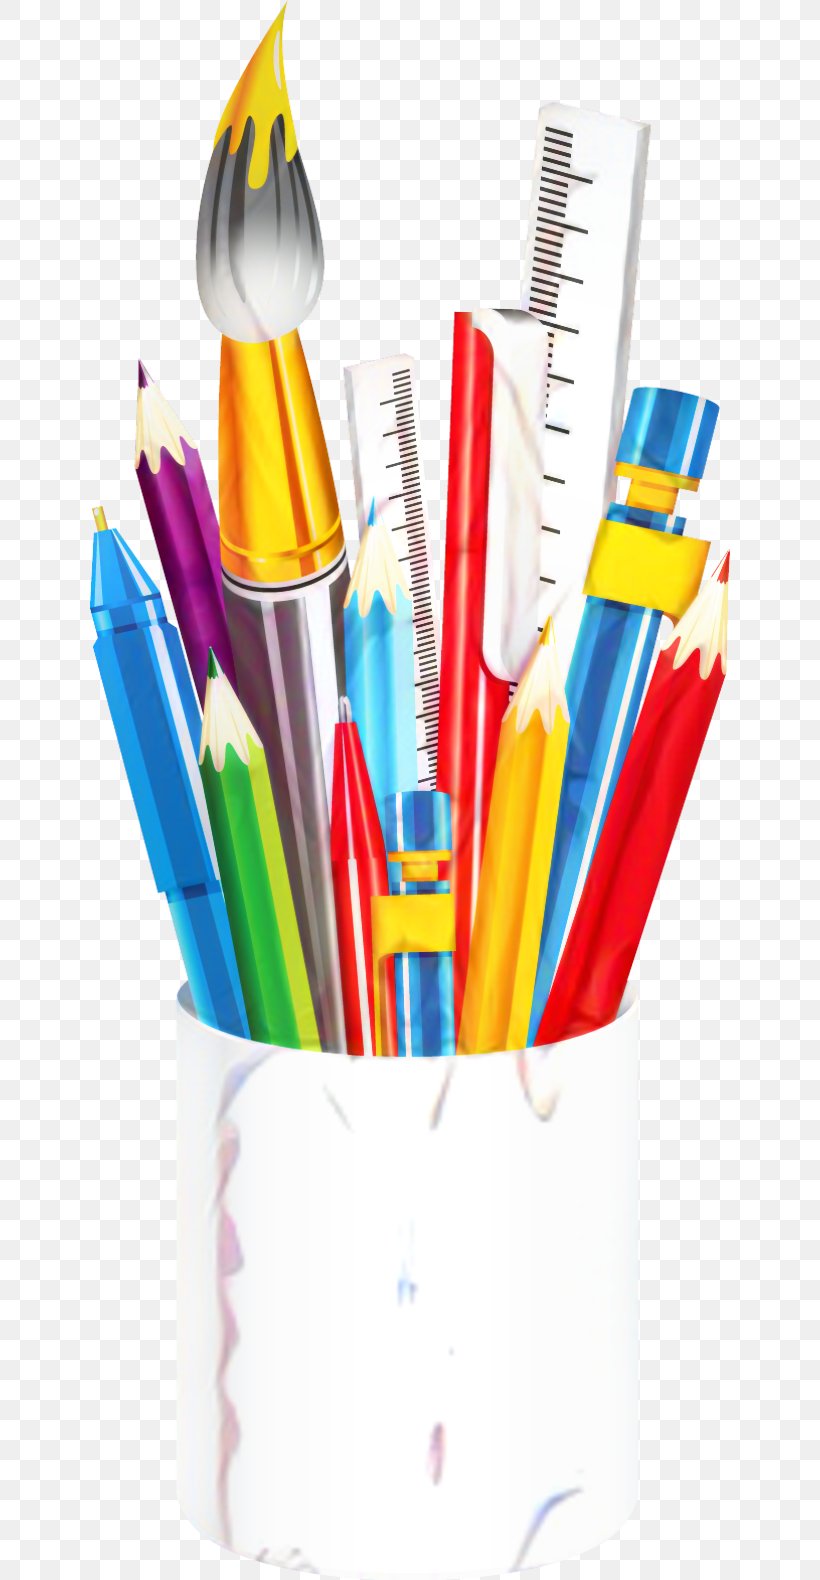 Pencil Writing Implement Product Design, PNG, 640x1580px, Pencil, Colorfulness, Office Instrument, Office Supplies, Pen Download Free